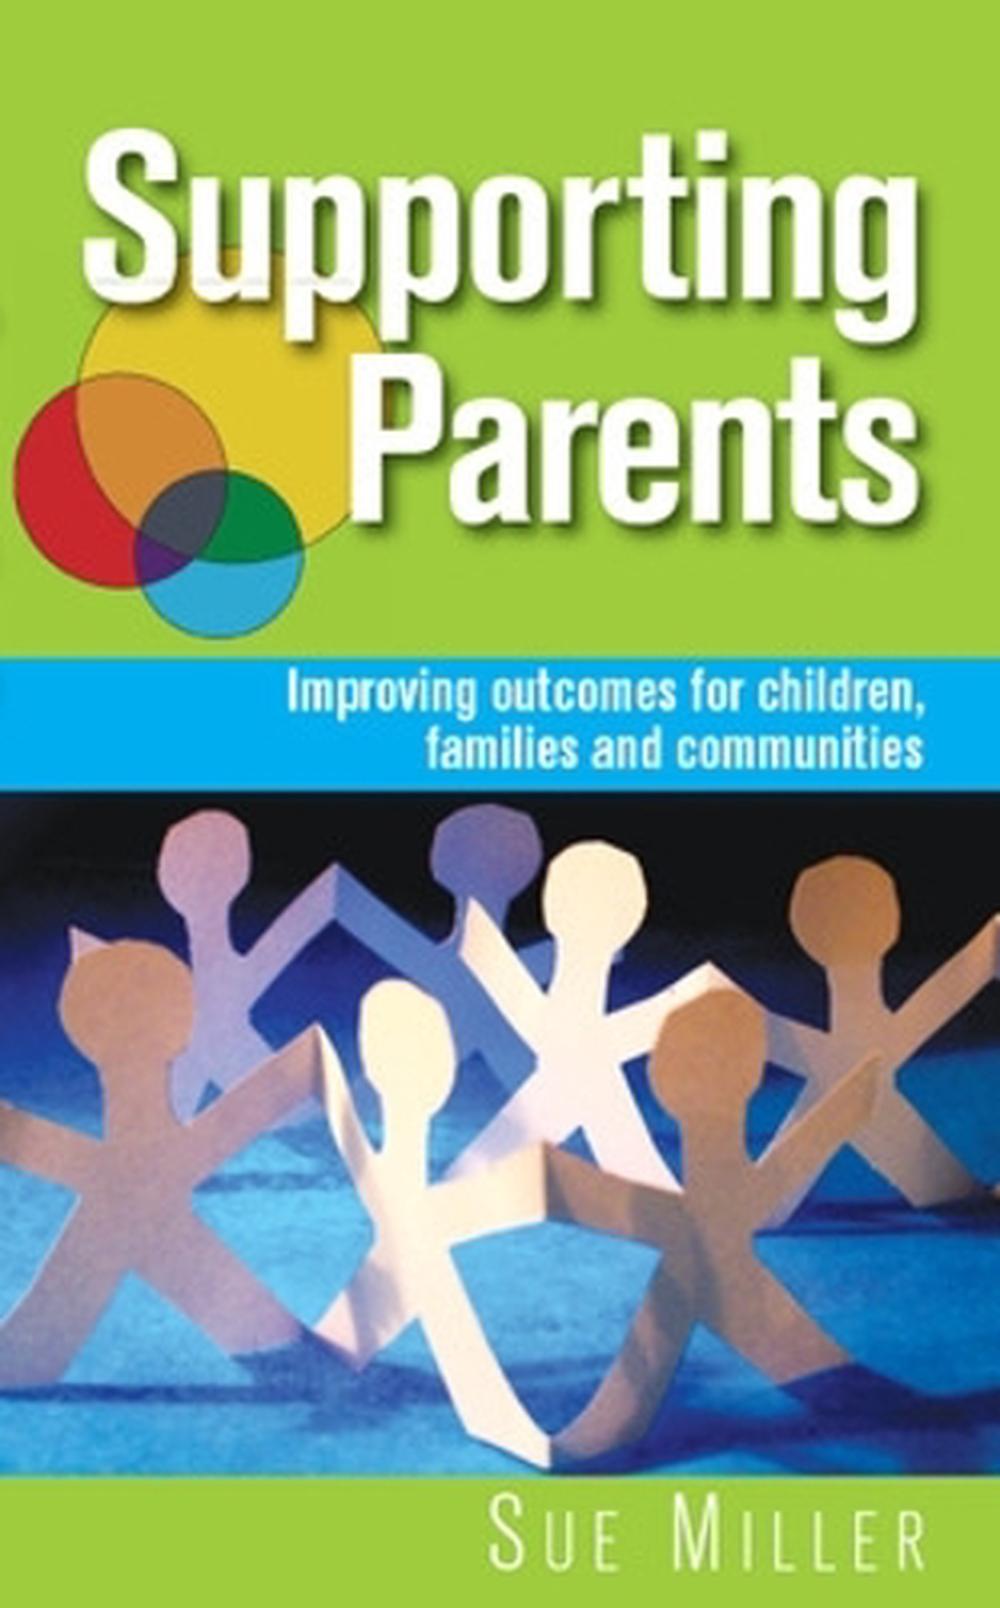 Parenting Style As Context An Integrative Model Parenting Takes Place ...